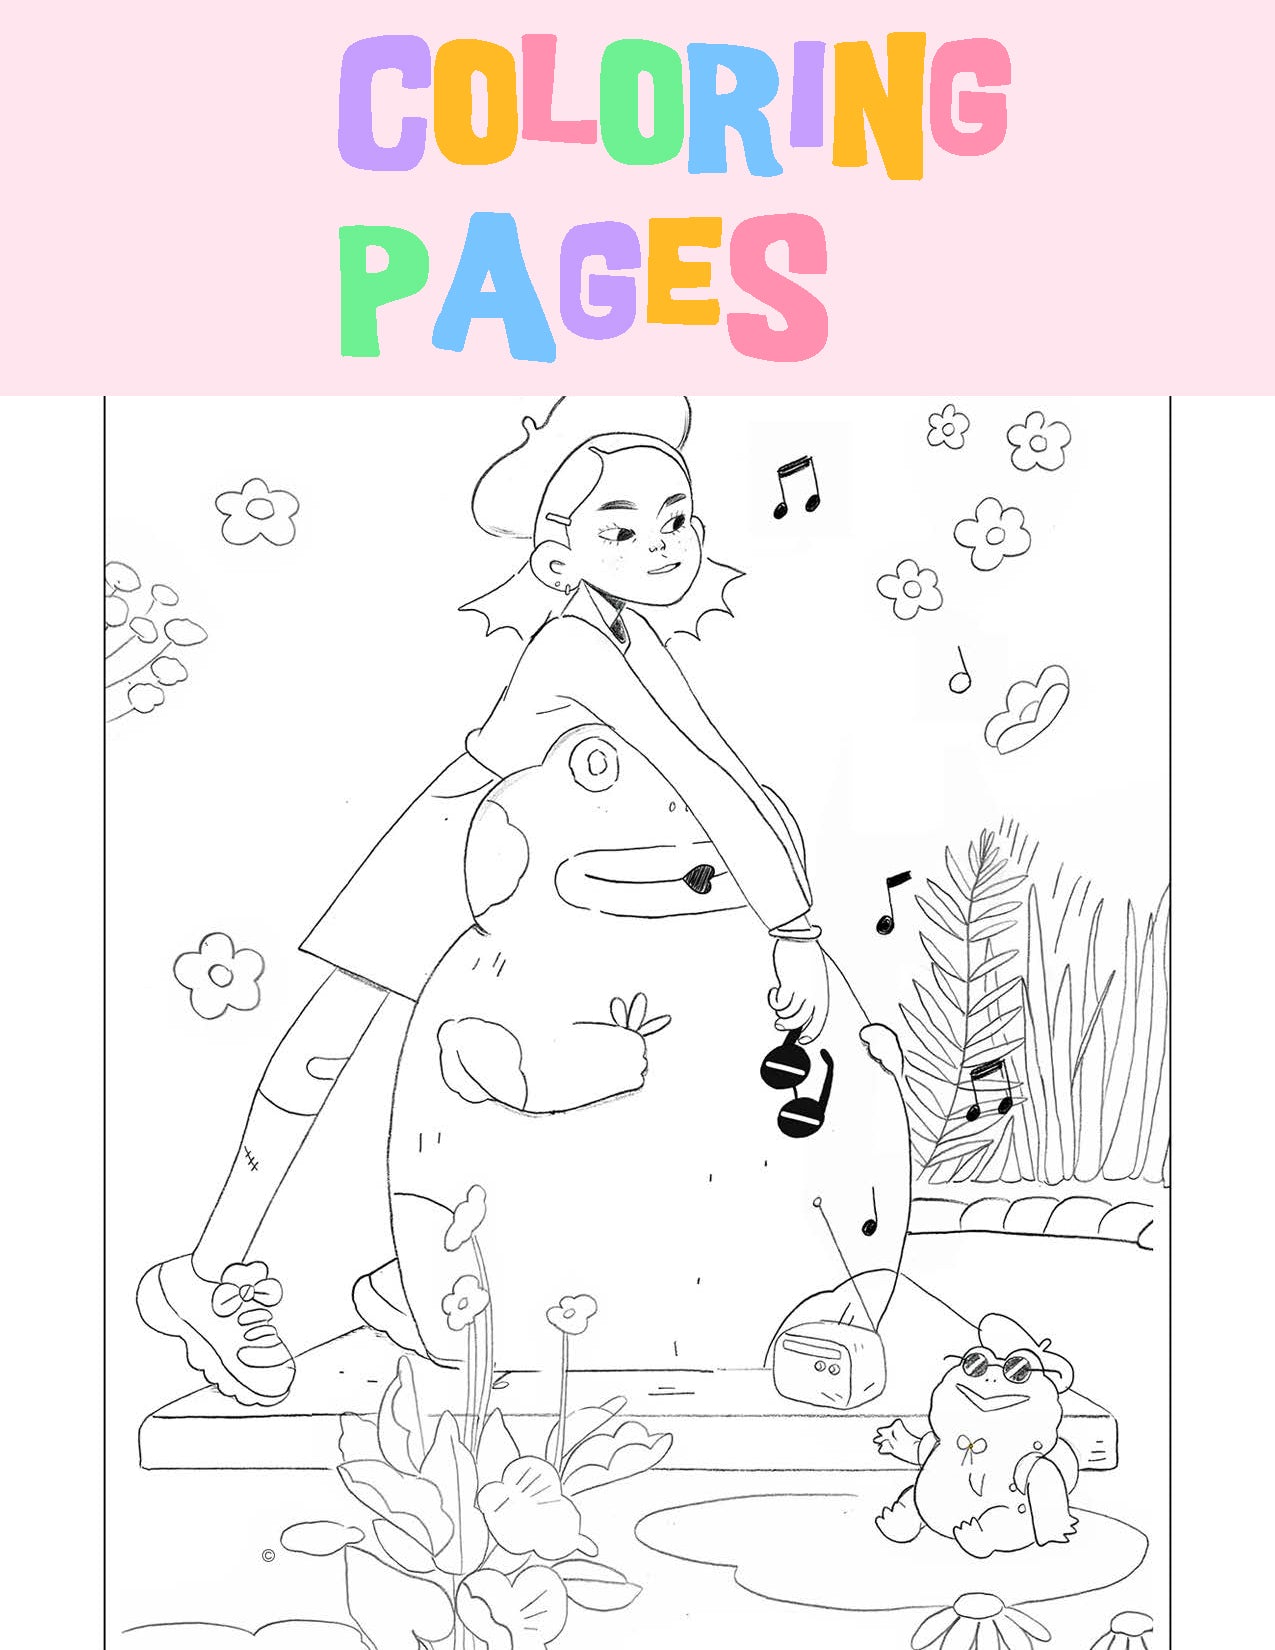 listening coloring pages